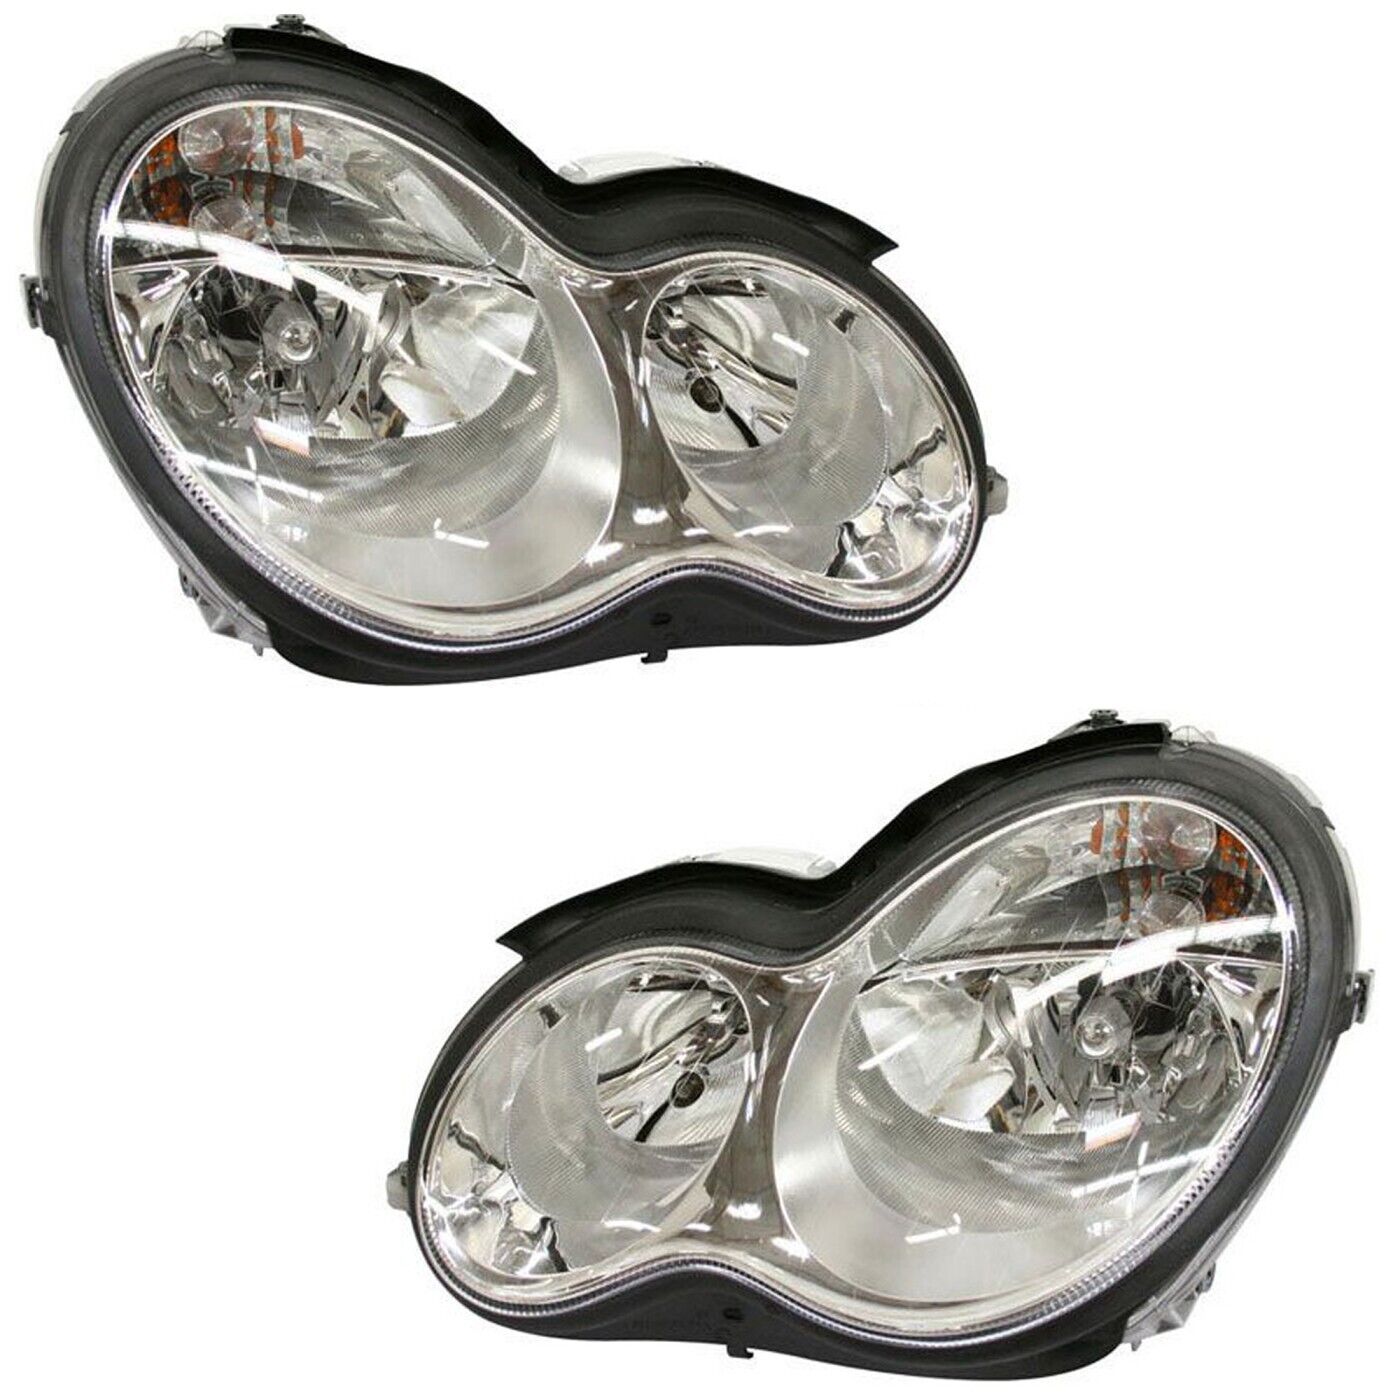 Headlight Set For 2005-2007 Mercedes Benz C230 2006-07 C280 Left Right With Bulb